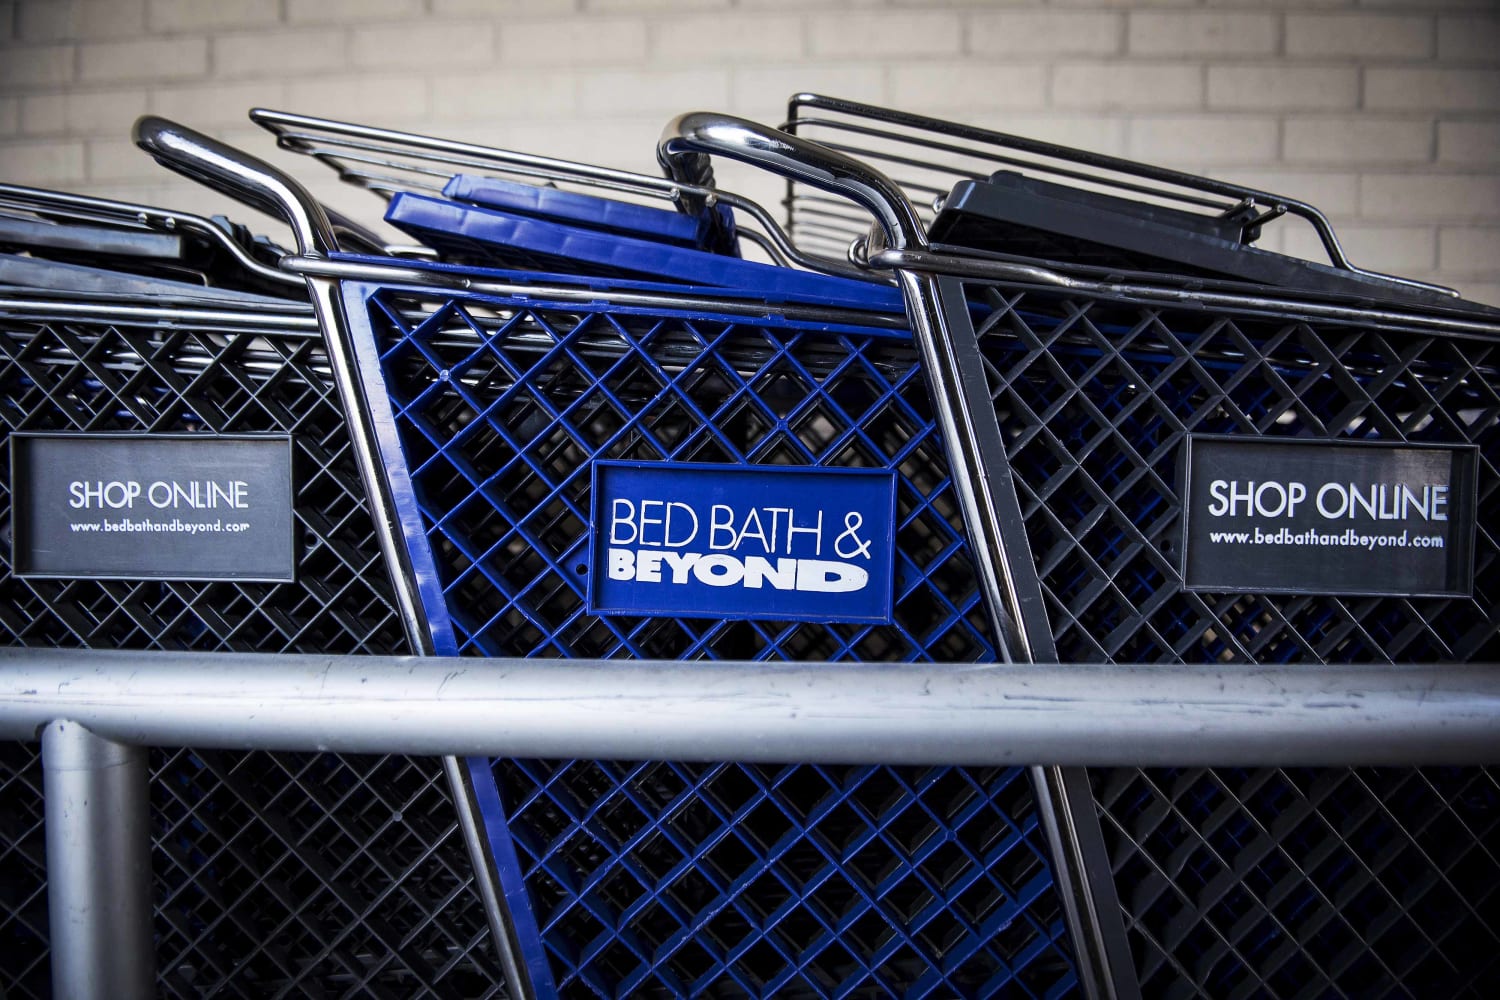 Bed Bath & Beyond is back from the dead